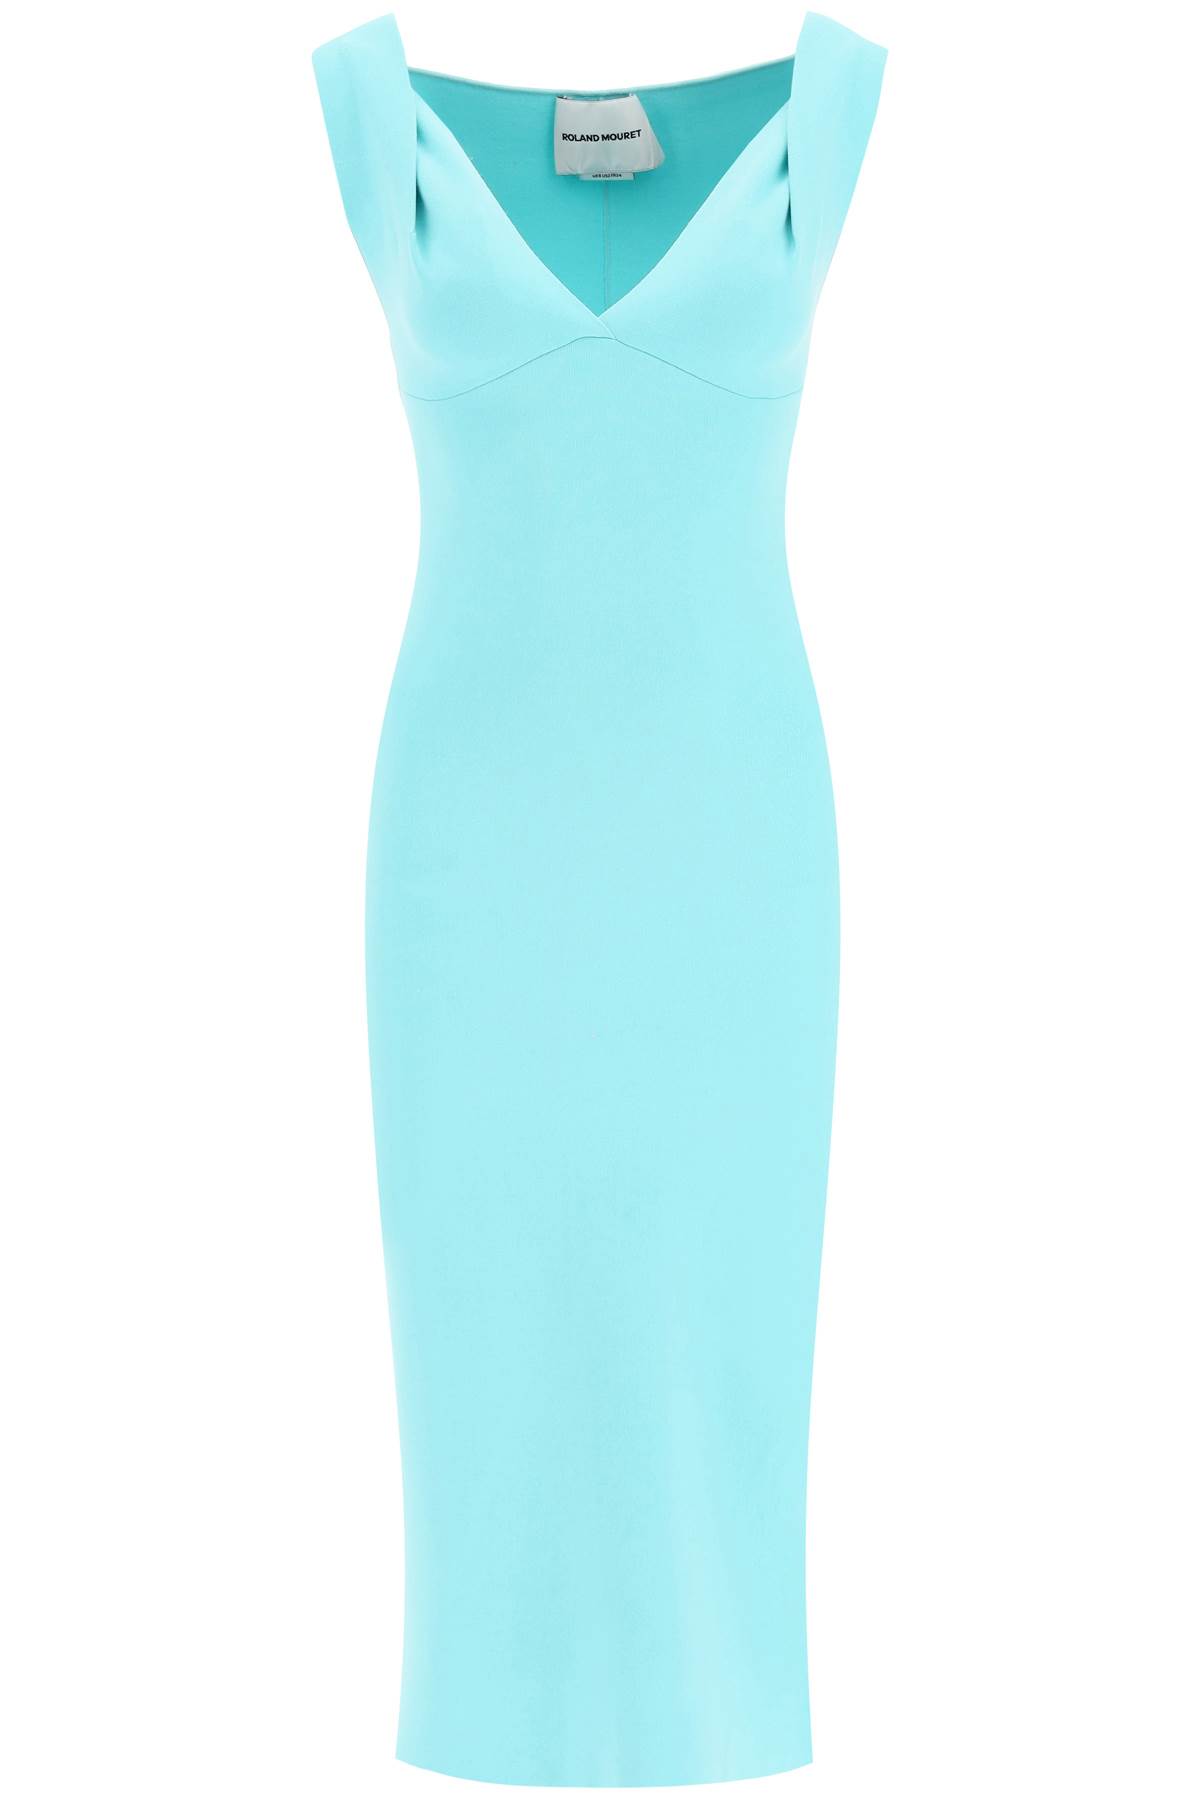 ROLAND MOURET KNIT FITTED MIDI DRESS